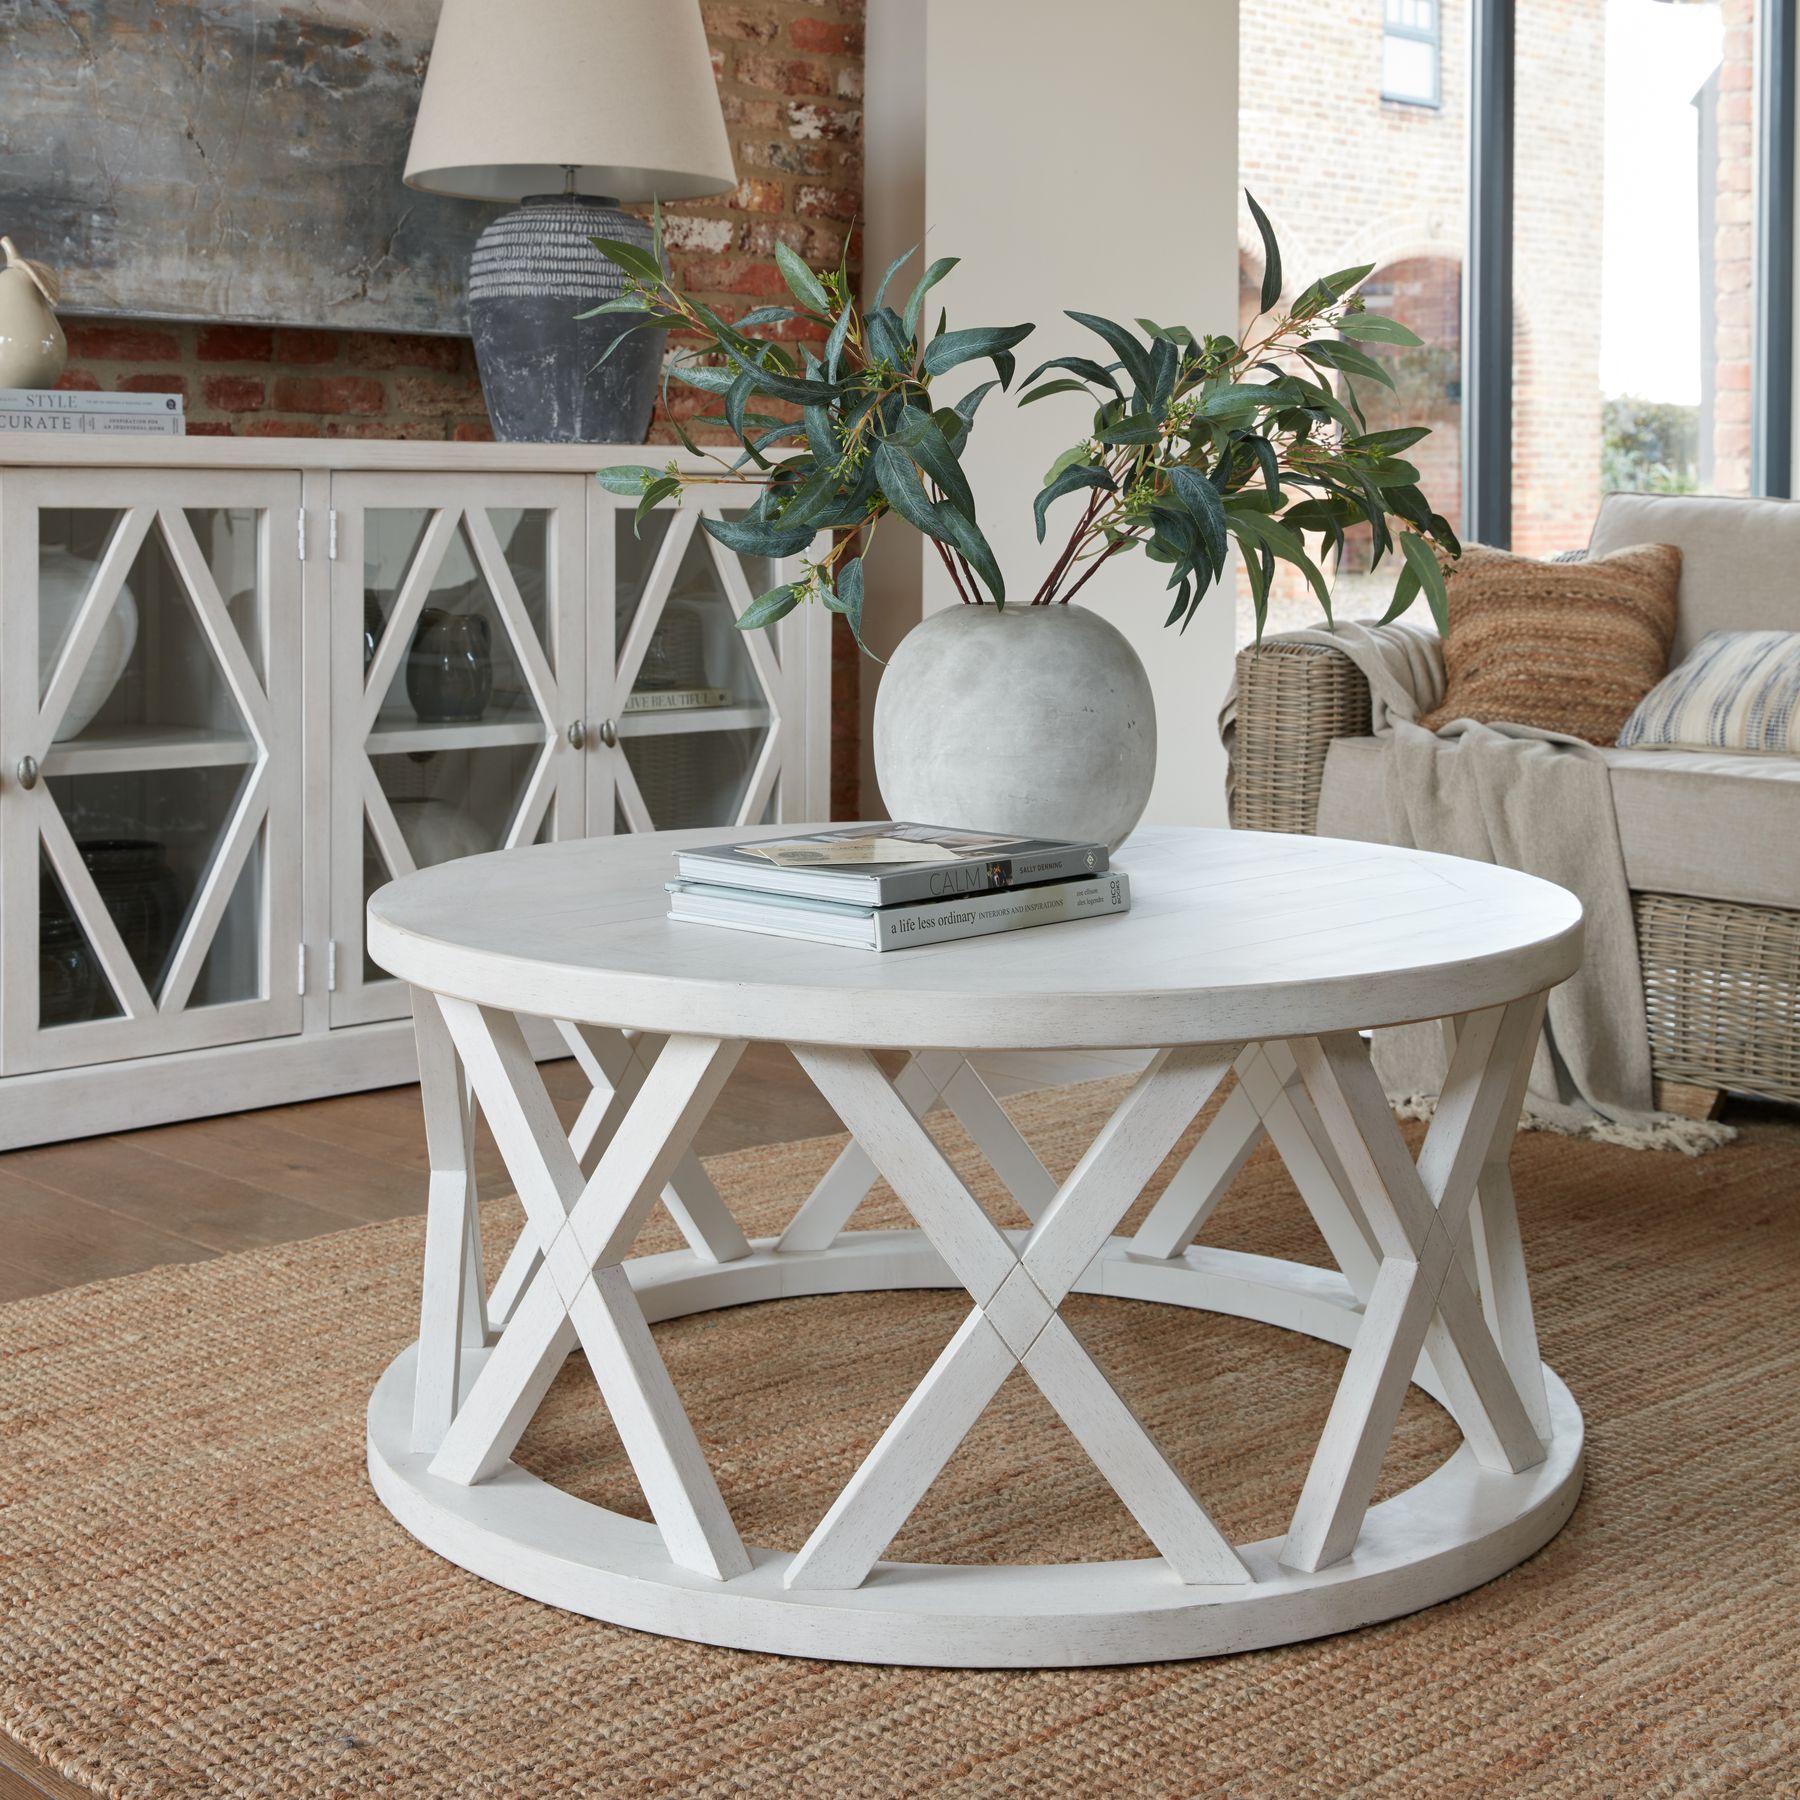 Stamford Plank Collection Round Coffee Table - Image 5